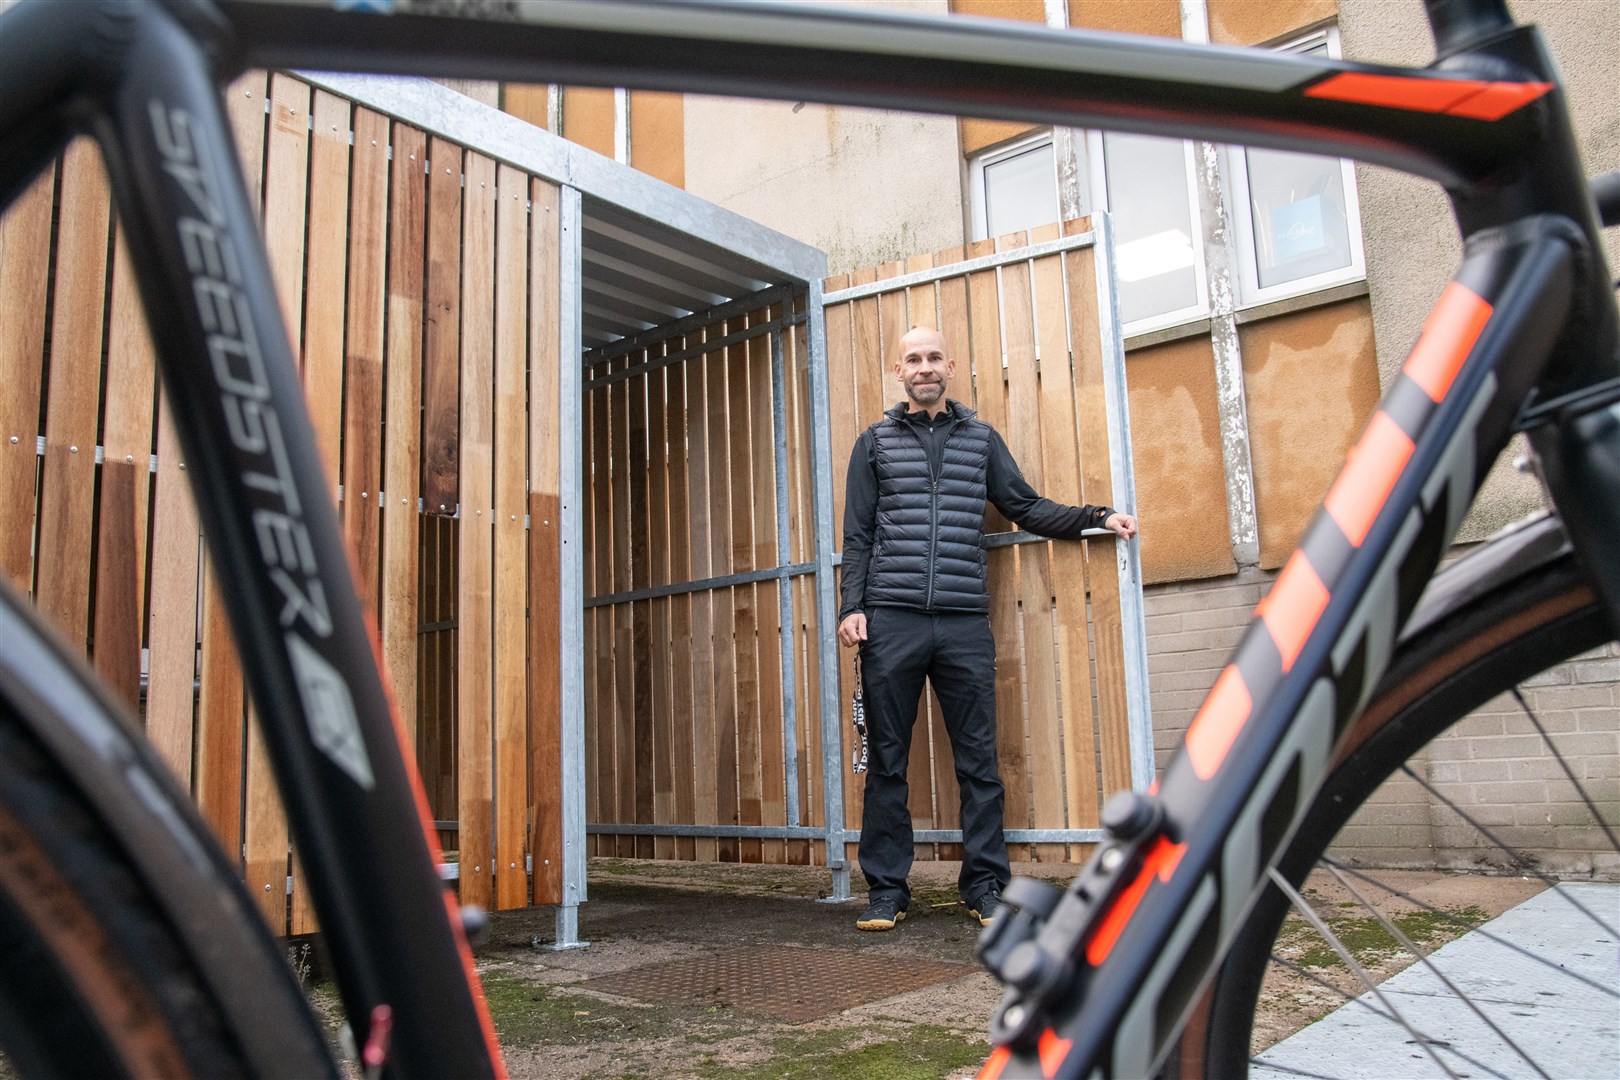 BCHS teacher Stefan Wojcik is hoping the new storage facility will encourage fellow staff members to get on their bikes. Picture: Daniel Forsyth